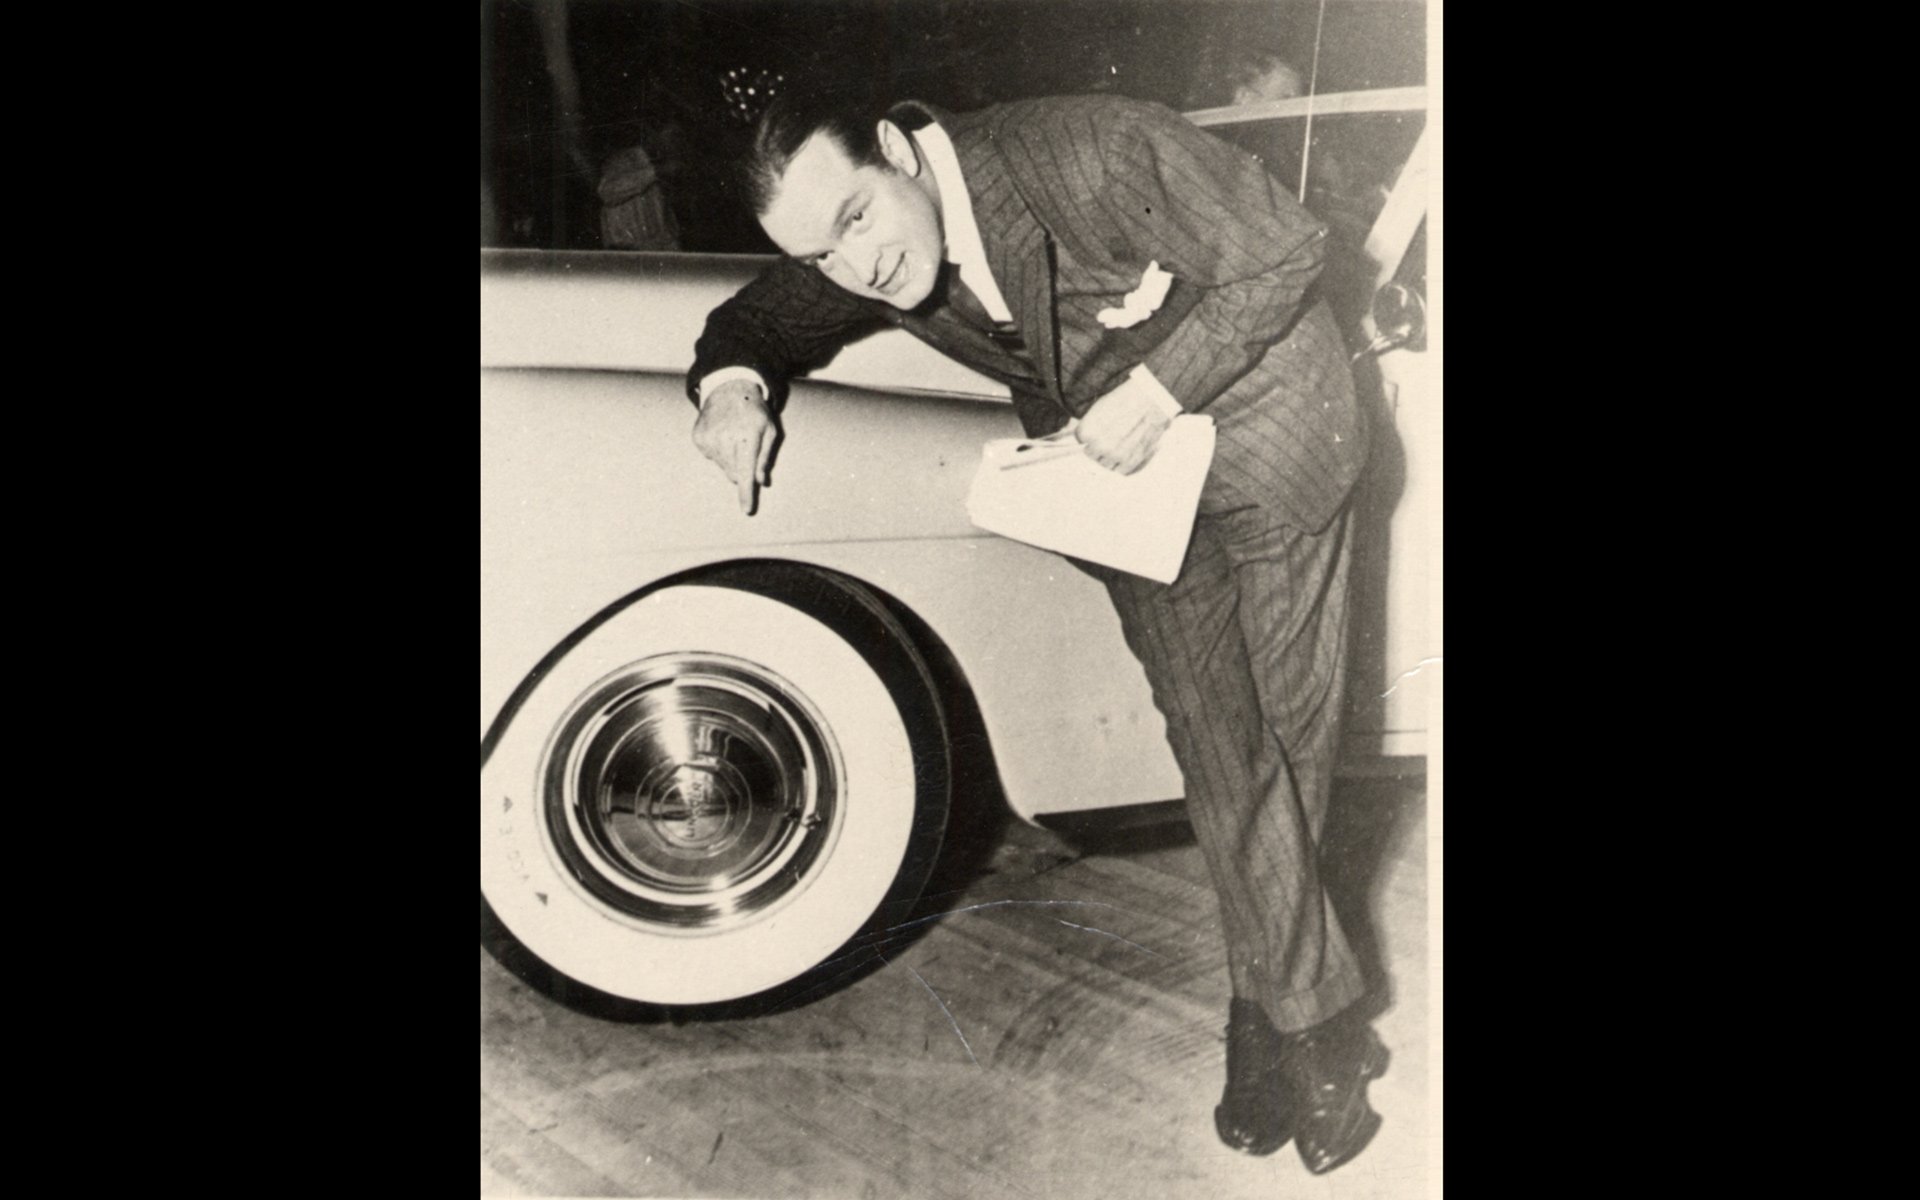 Bob Hope pointing to Vogue Tyre whitewall tires on a vehicle.